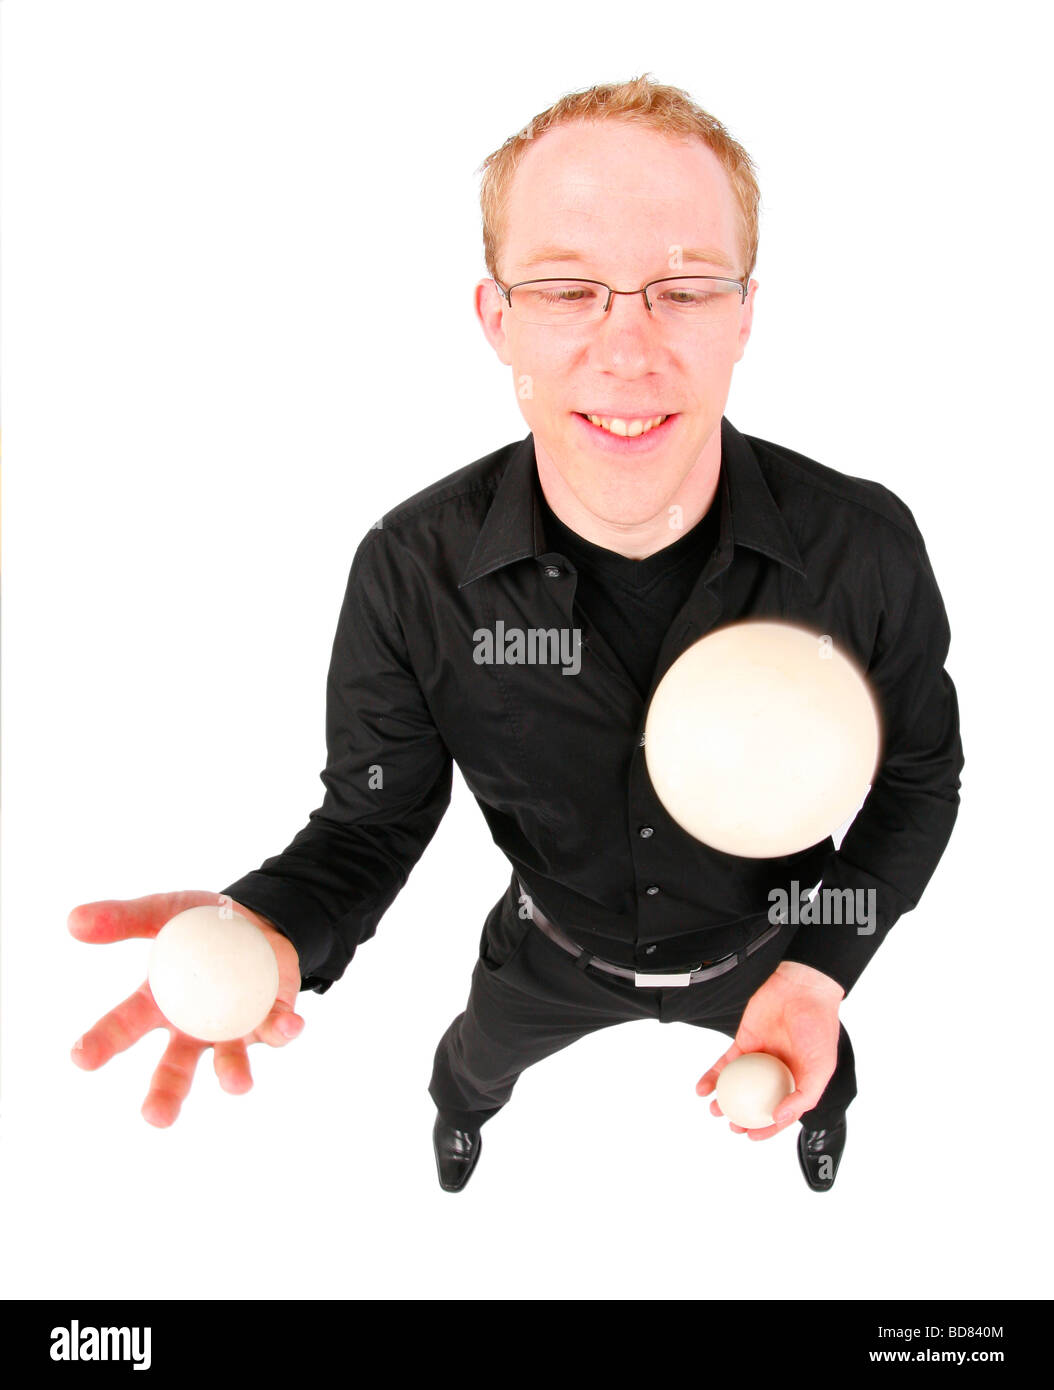 young man juggling with three balls Stock Photo